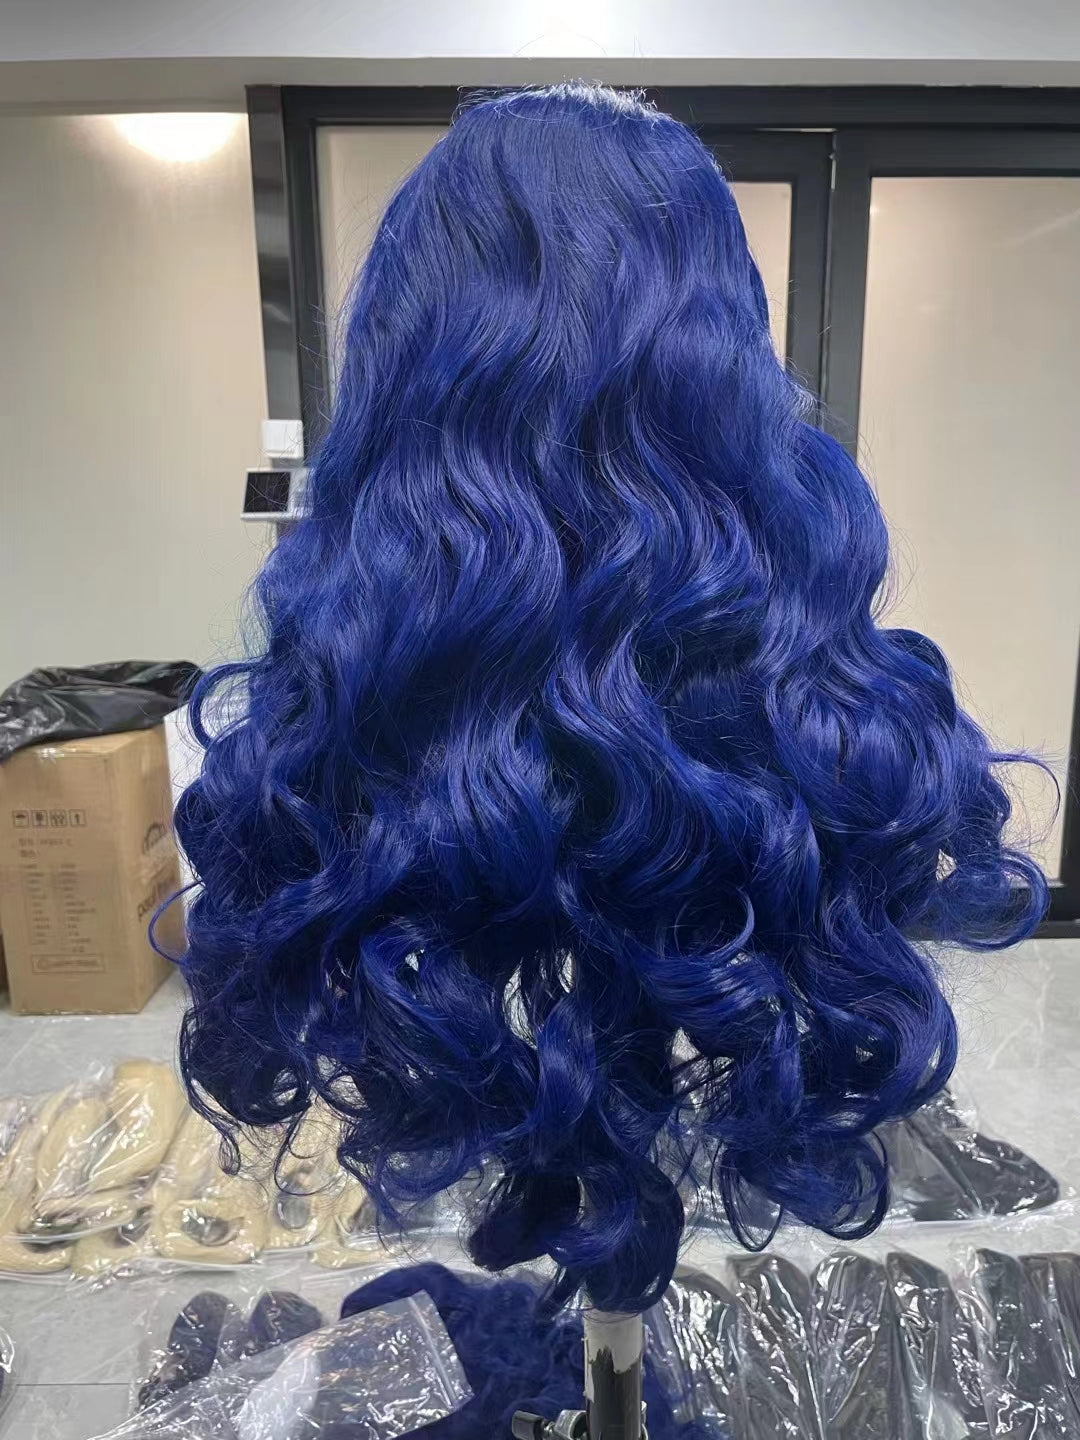 Long Straight Soft Hair Blue Body Wave Wig For Women HD Lace Front Wig Human Hair For Cosplay